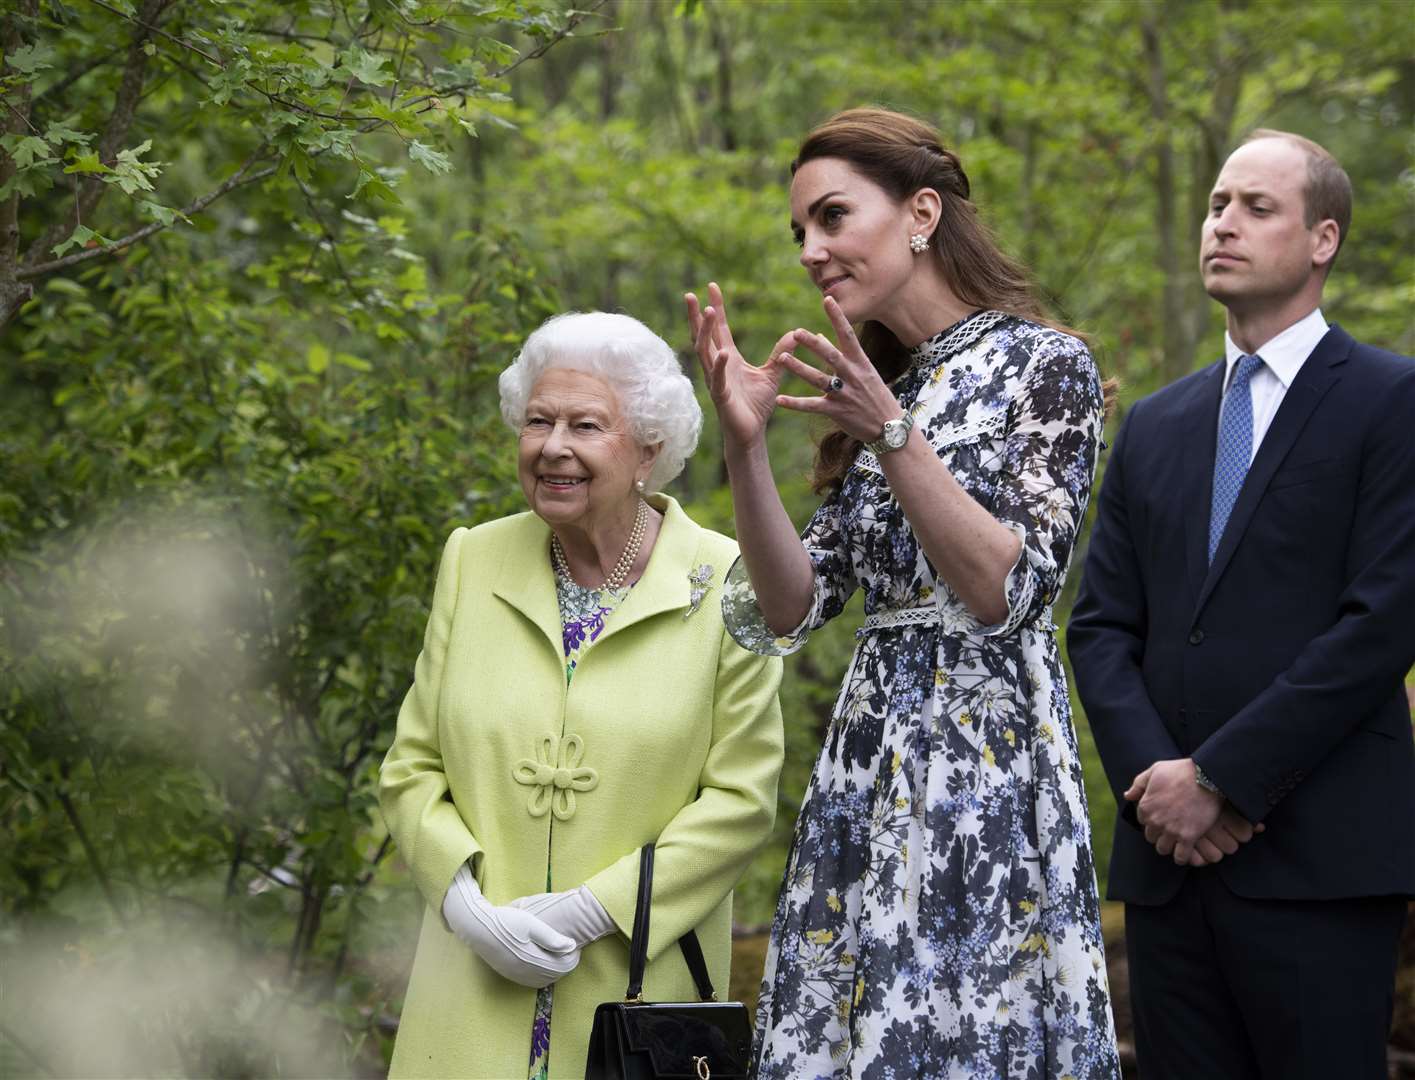 The Queen with the Duke and Duchess of Cambridge during their visit to the Chelsea Flower Show in 2019 (Geoff Pugh/PA)